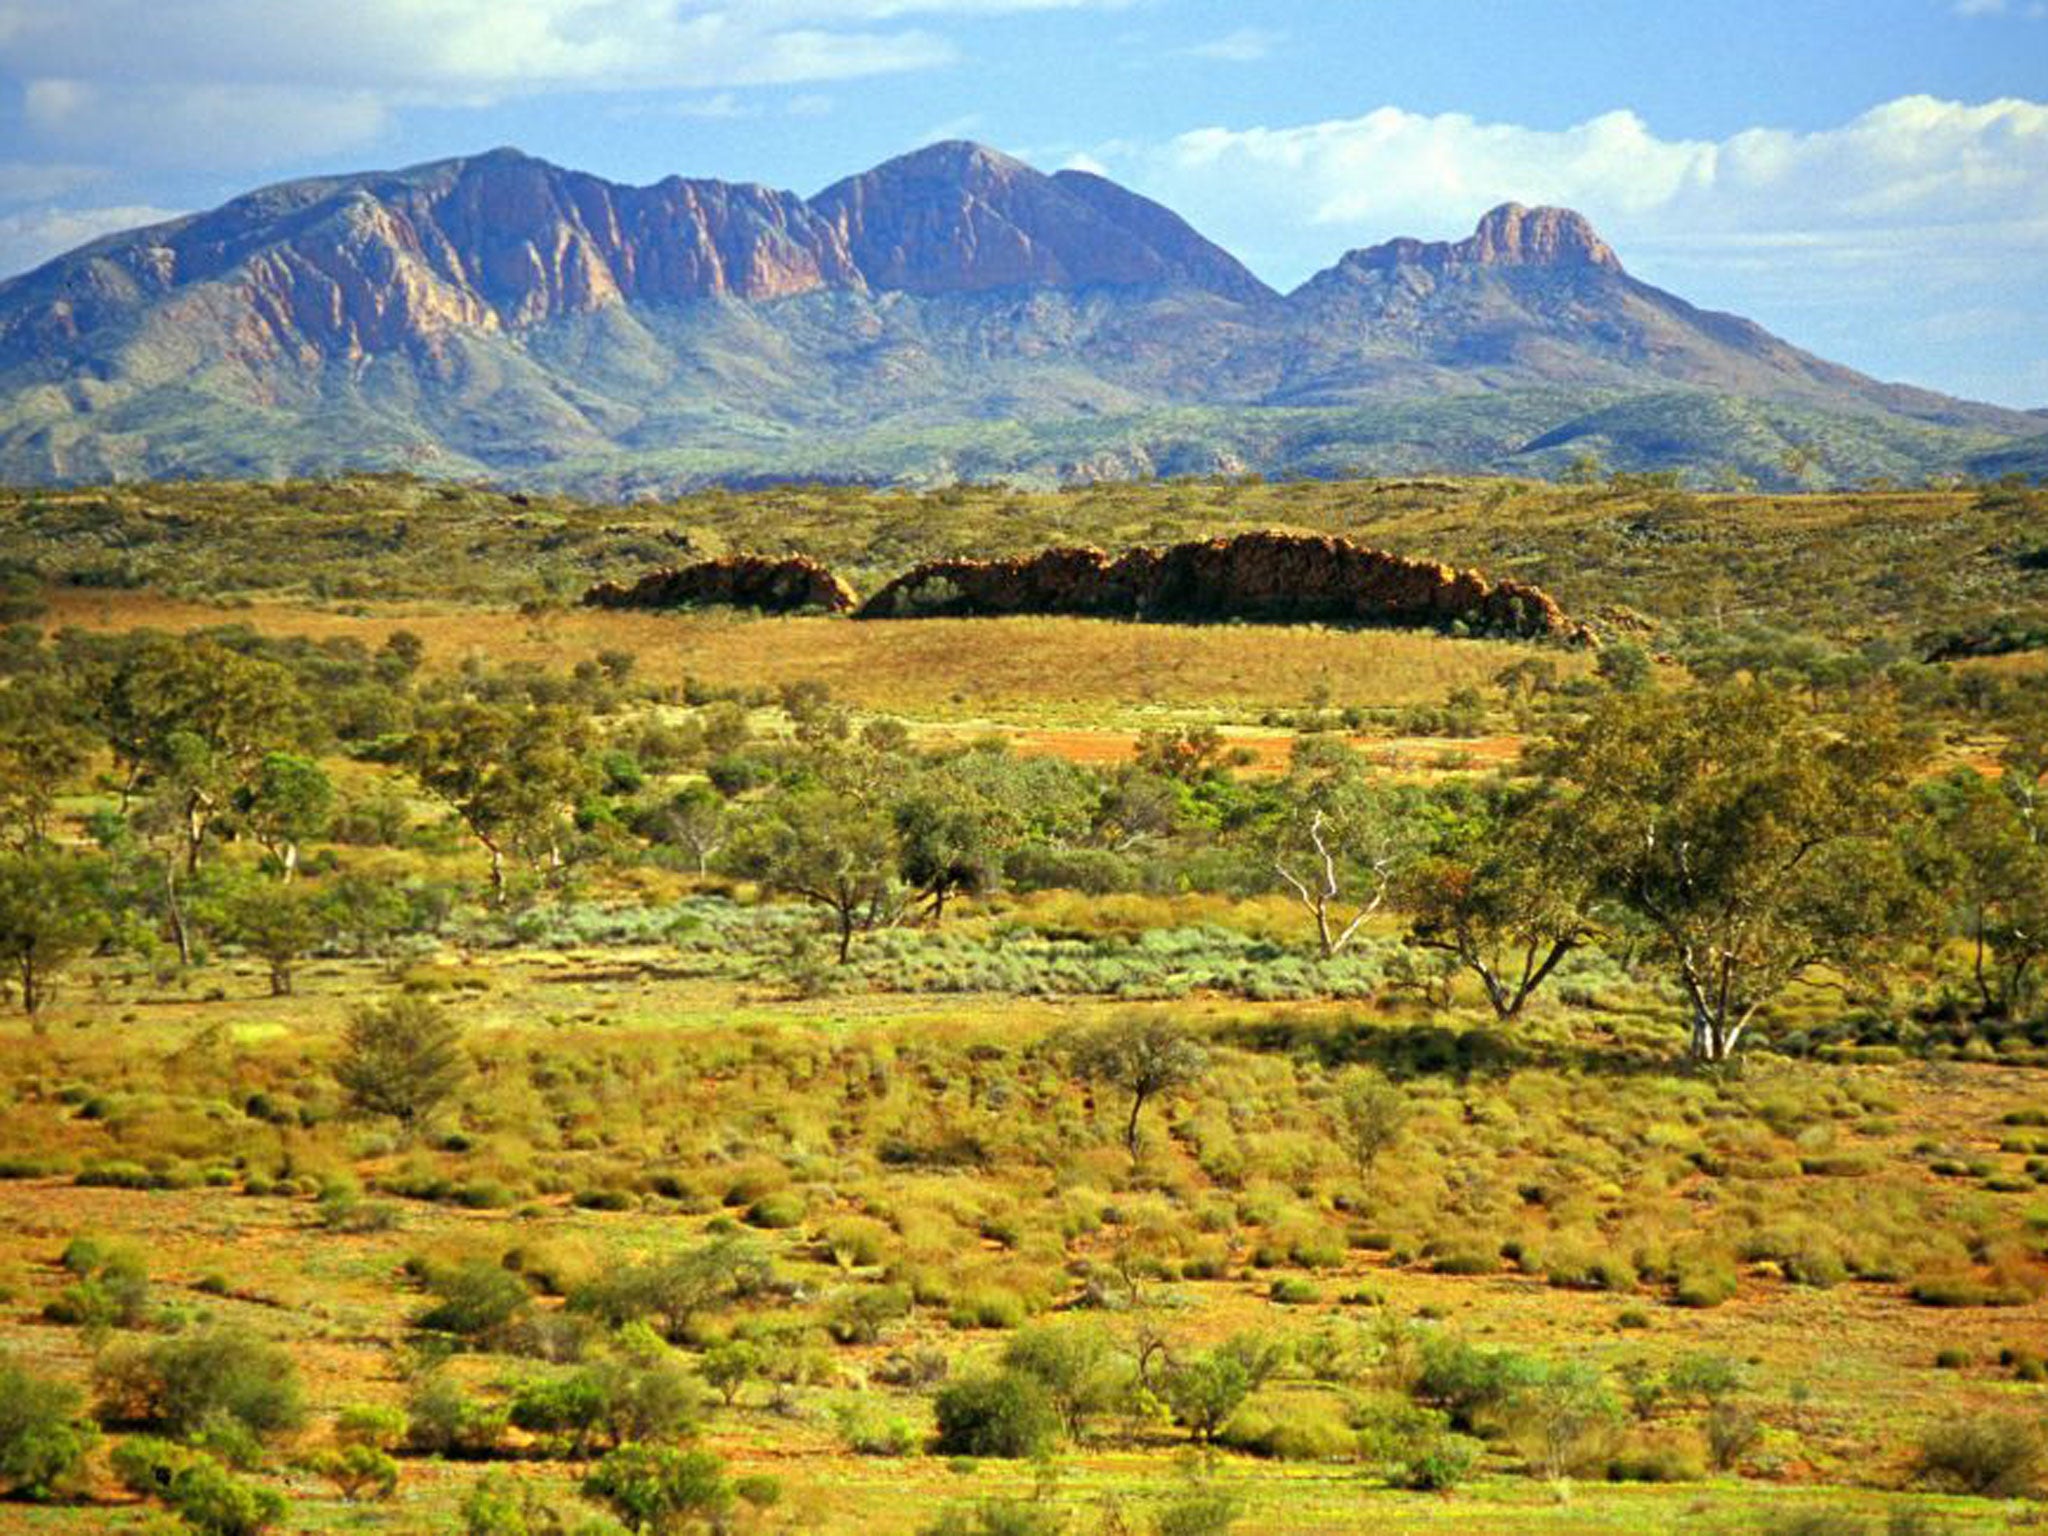 Rocks and a hard place: the West MacDonnell Ranges